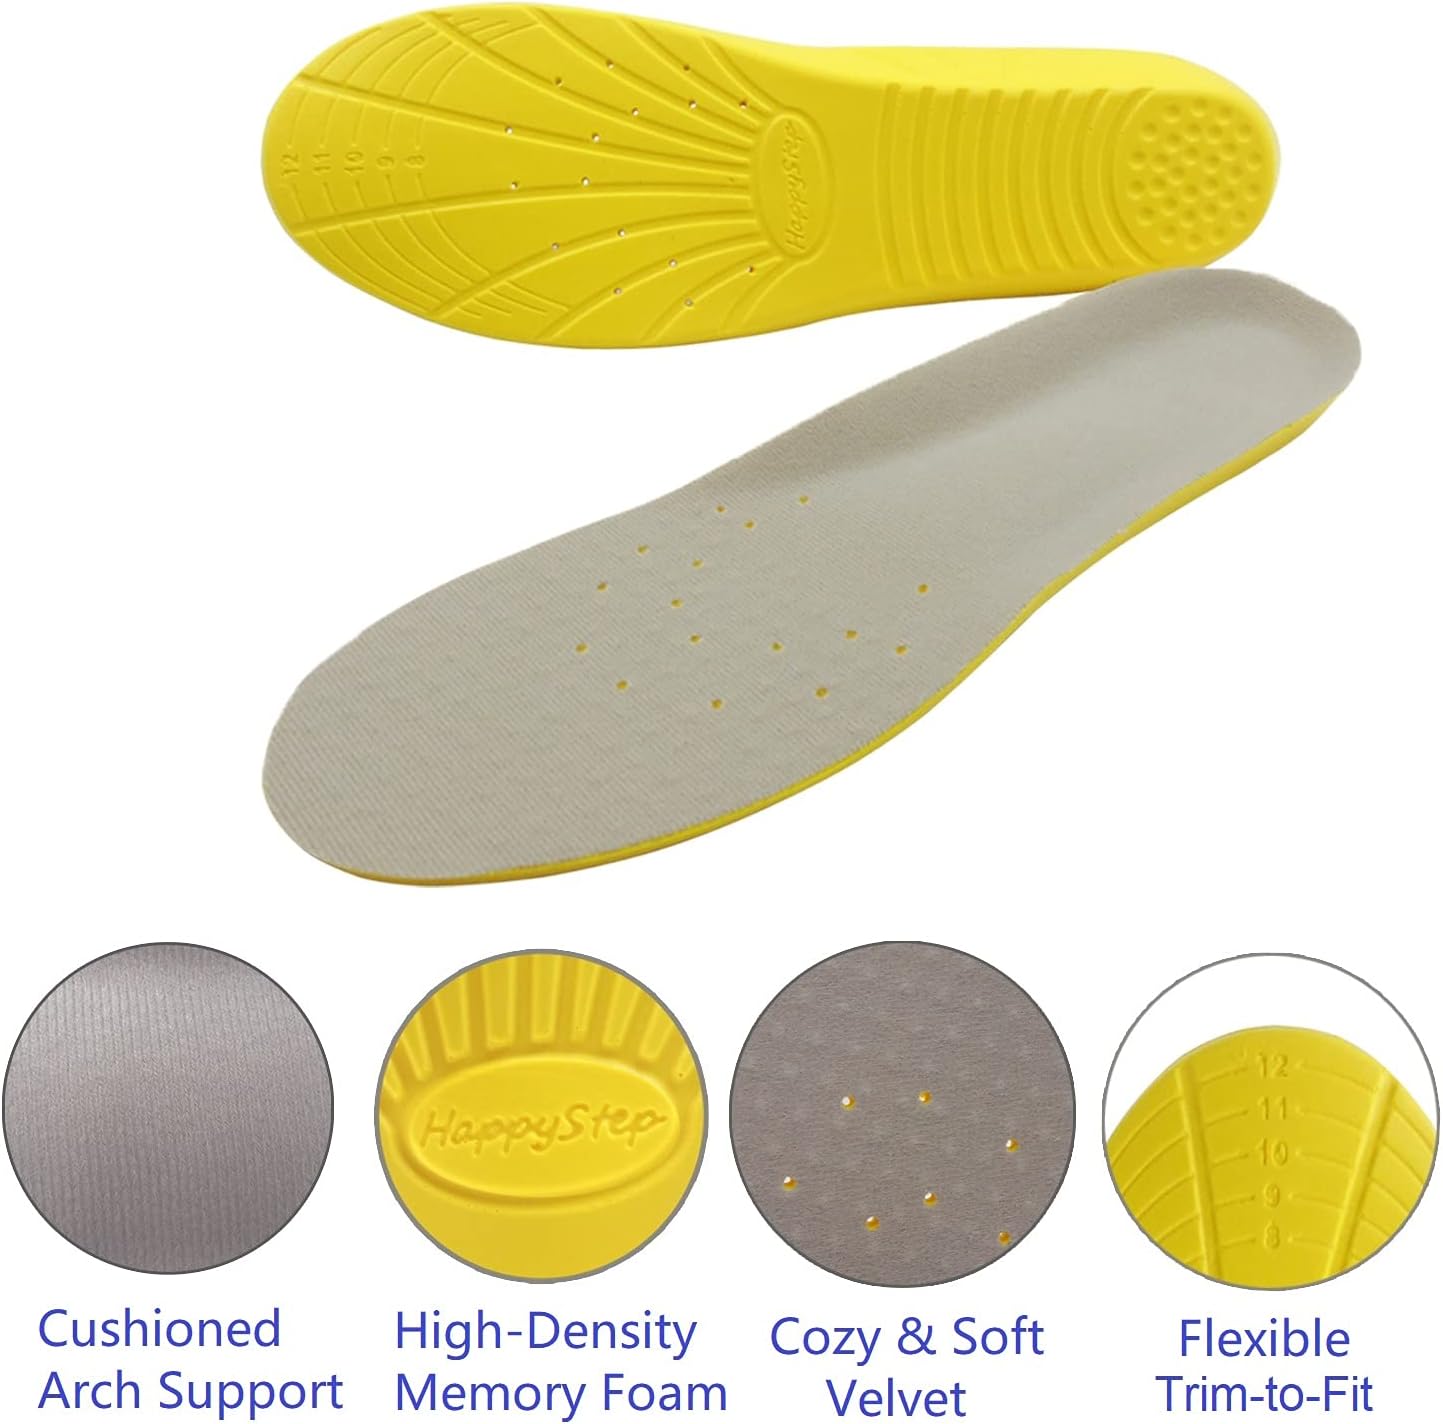 1 Pair Happystep Comfort Memory Foam Insoles, Orthotic PU Shoe Inserts, Arch Support, Heel Cushioning, Shock Absorption, Plantar Fasciitis Foot Pain Relief for Men and Women (US M: 8-12 or W: 9-14)